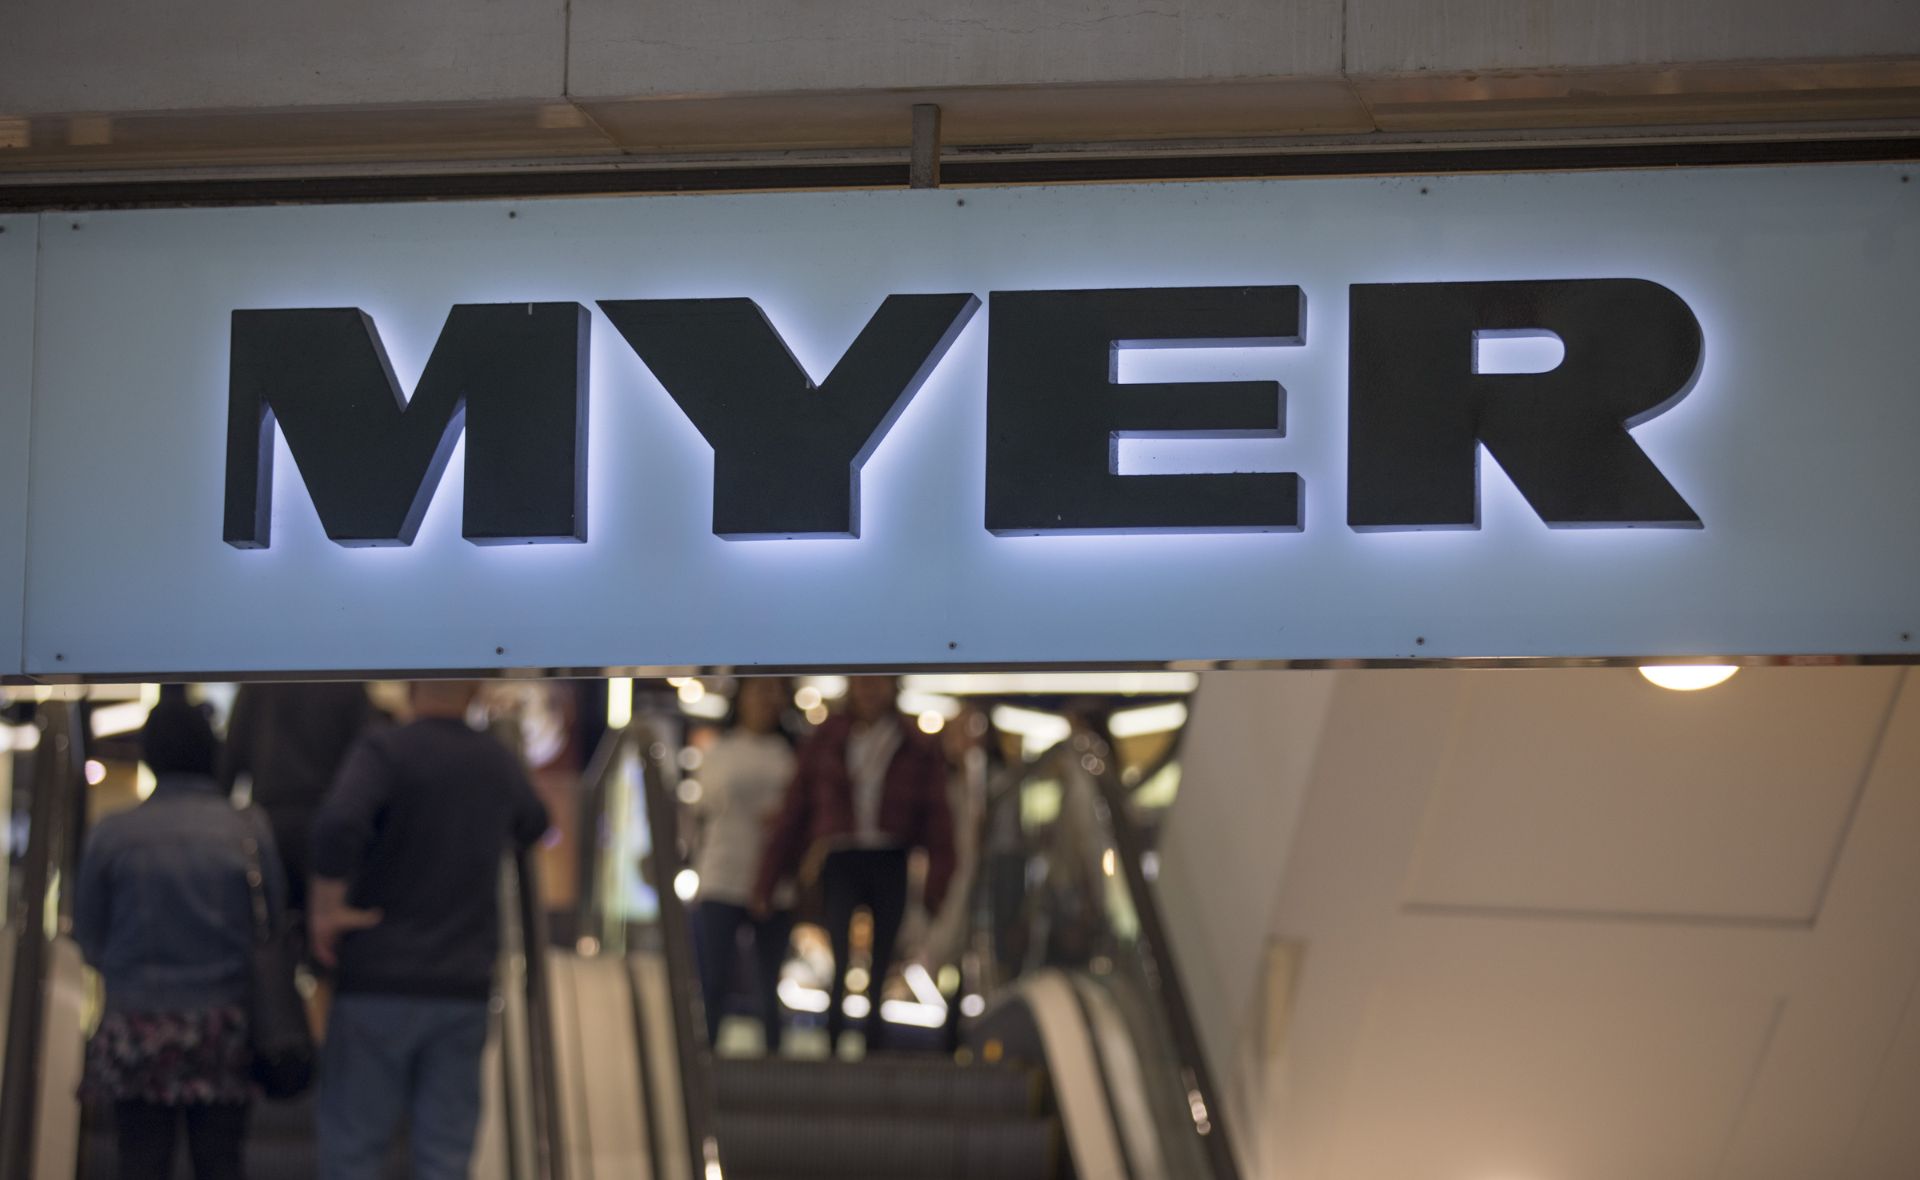 Get ready for Myer’s huge Boxing Day sales